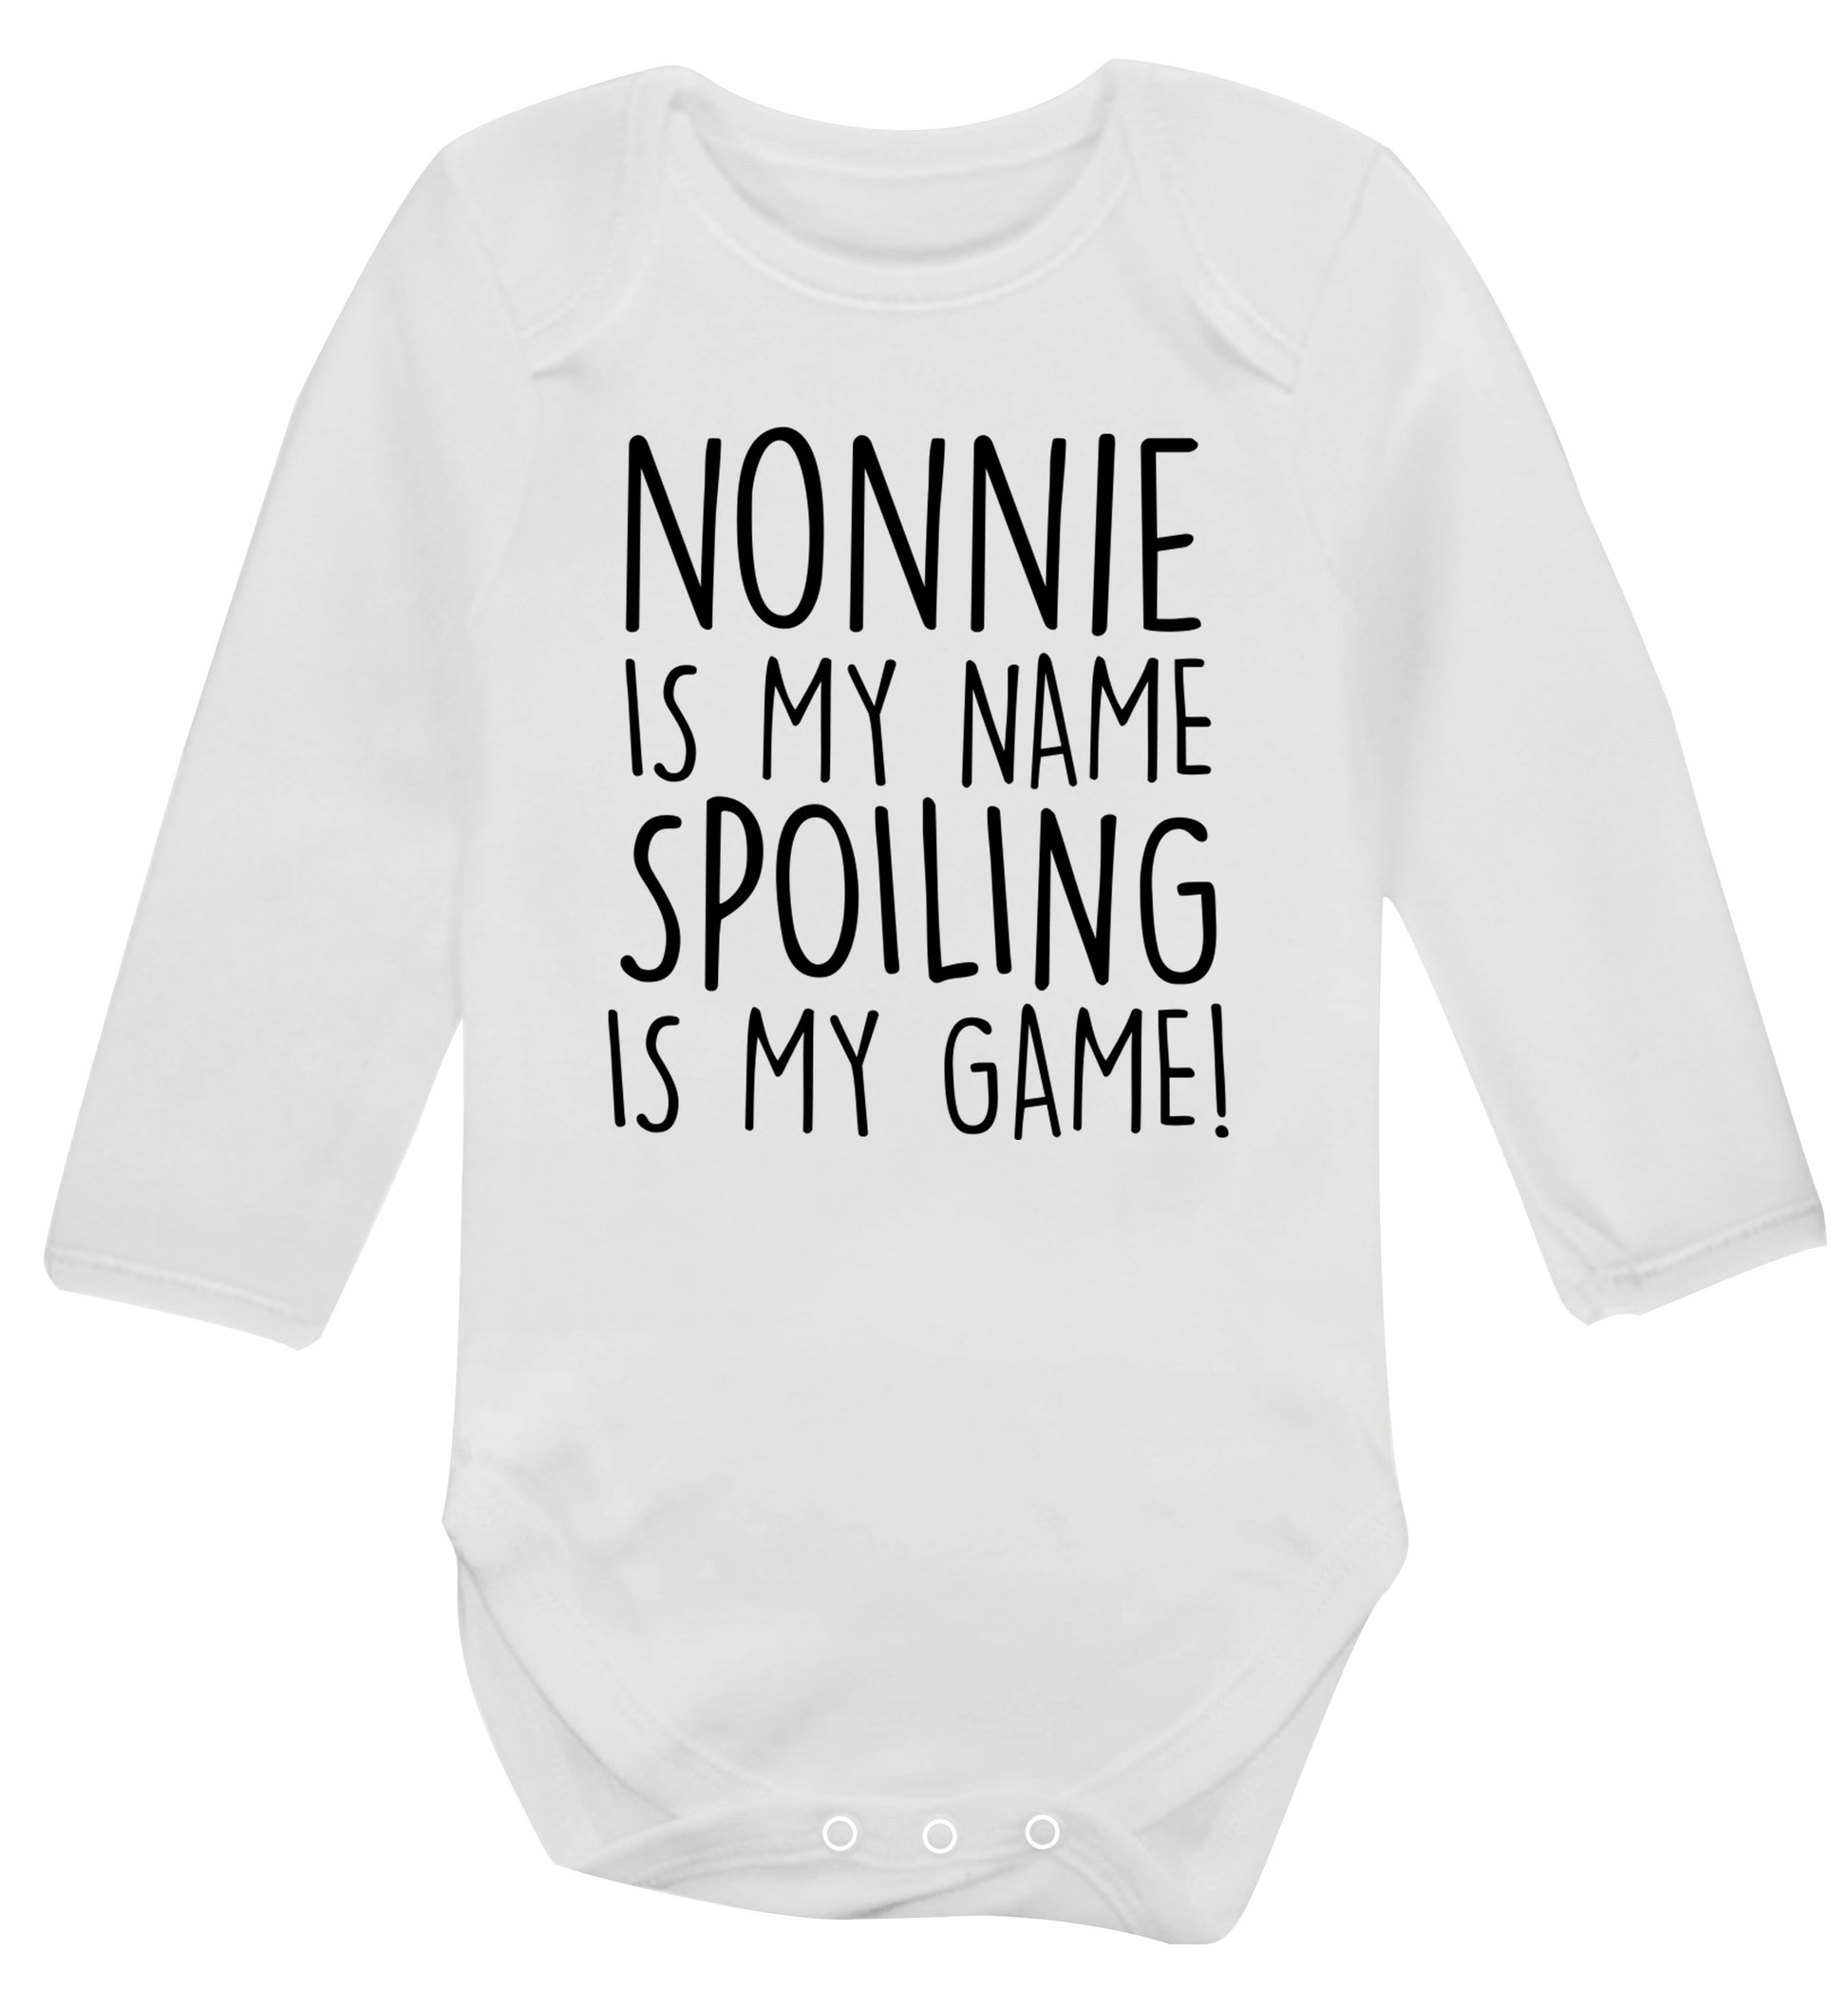 Nonnie is my name, spoiling is my game Baby Vest long sleeved white 6-12 months